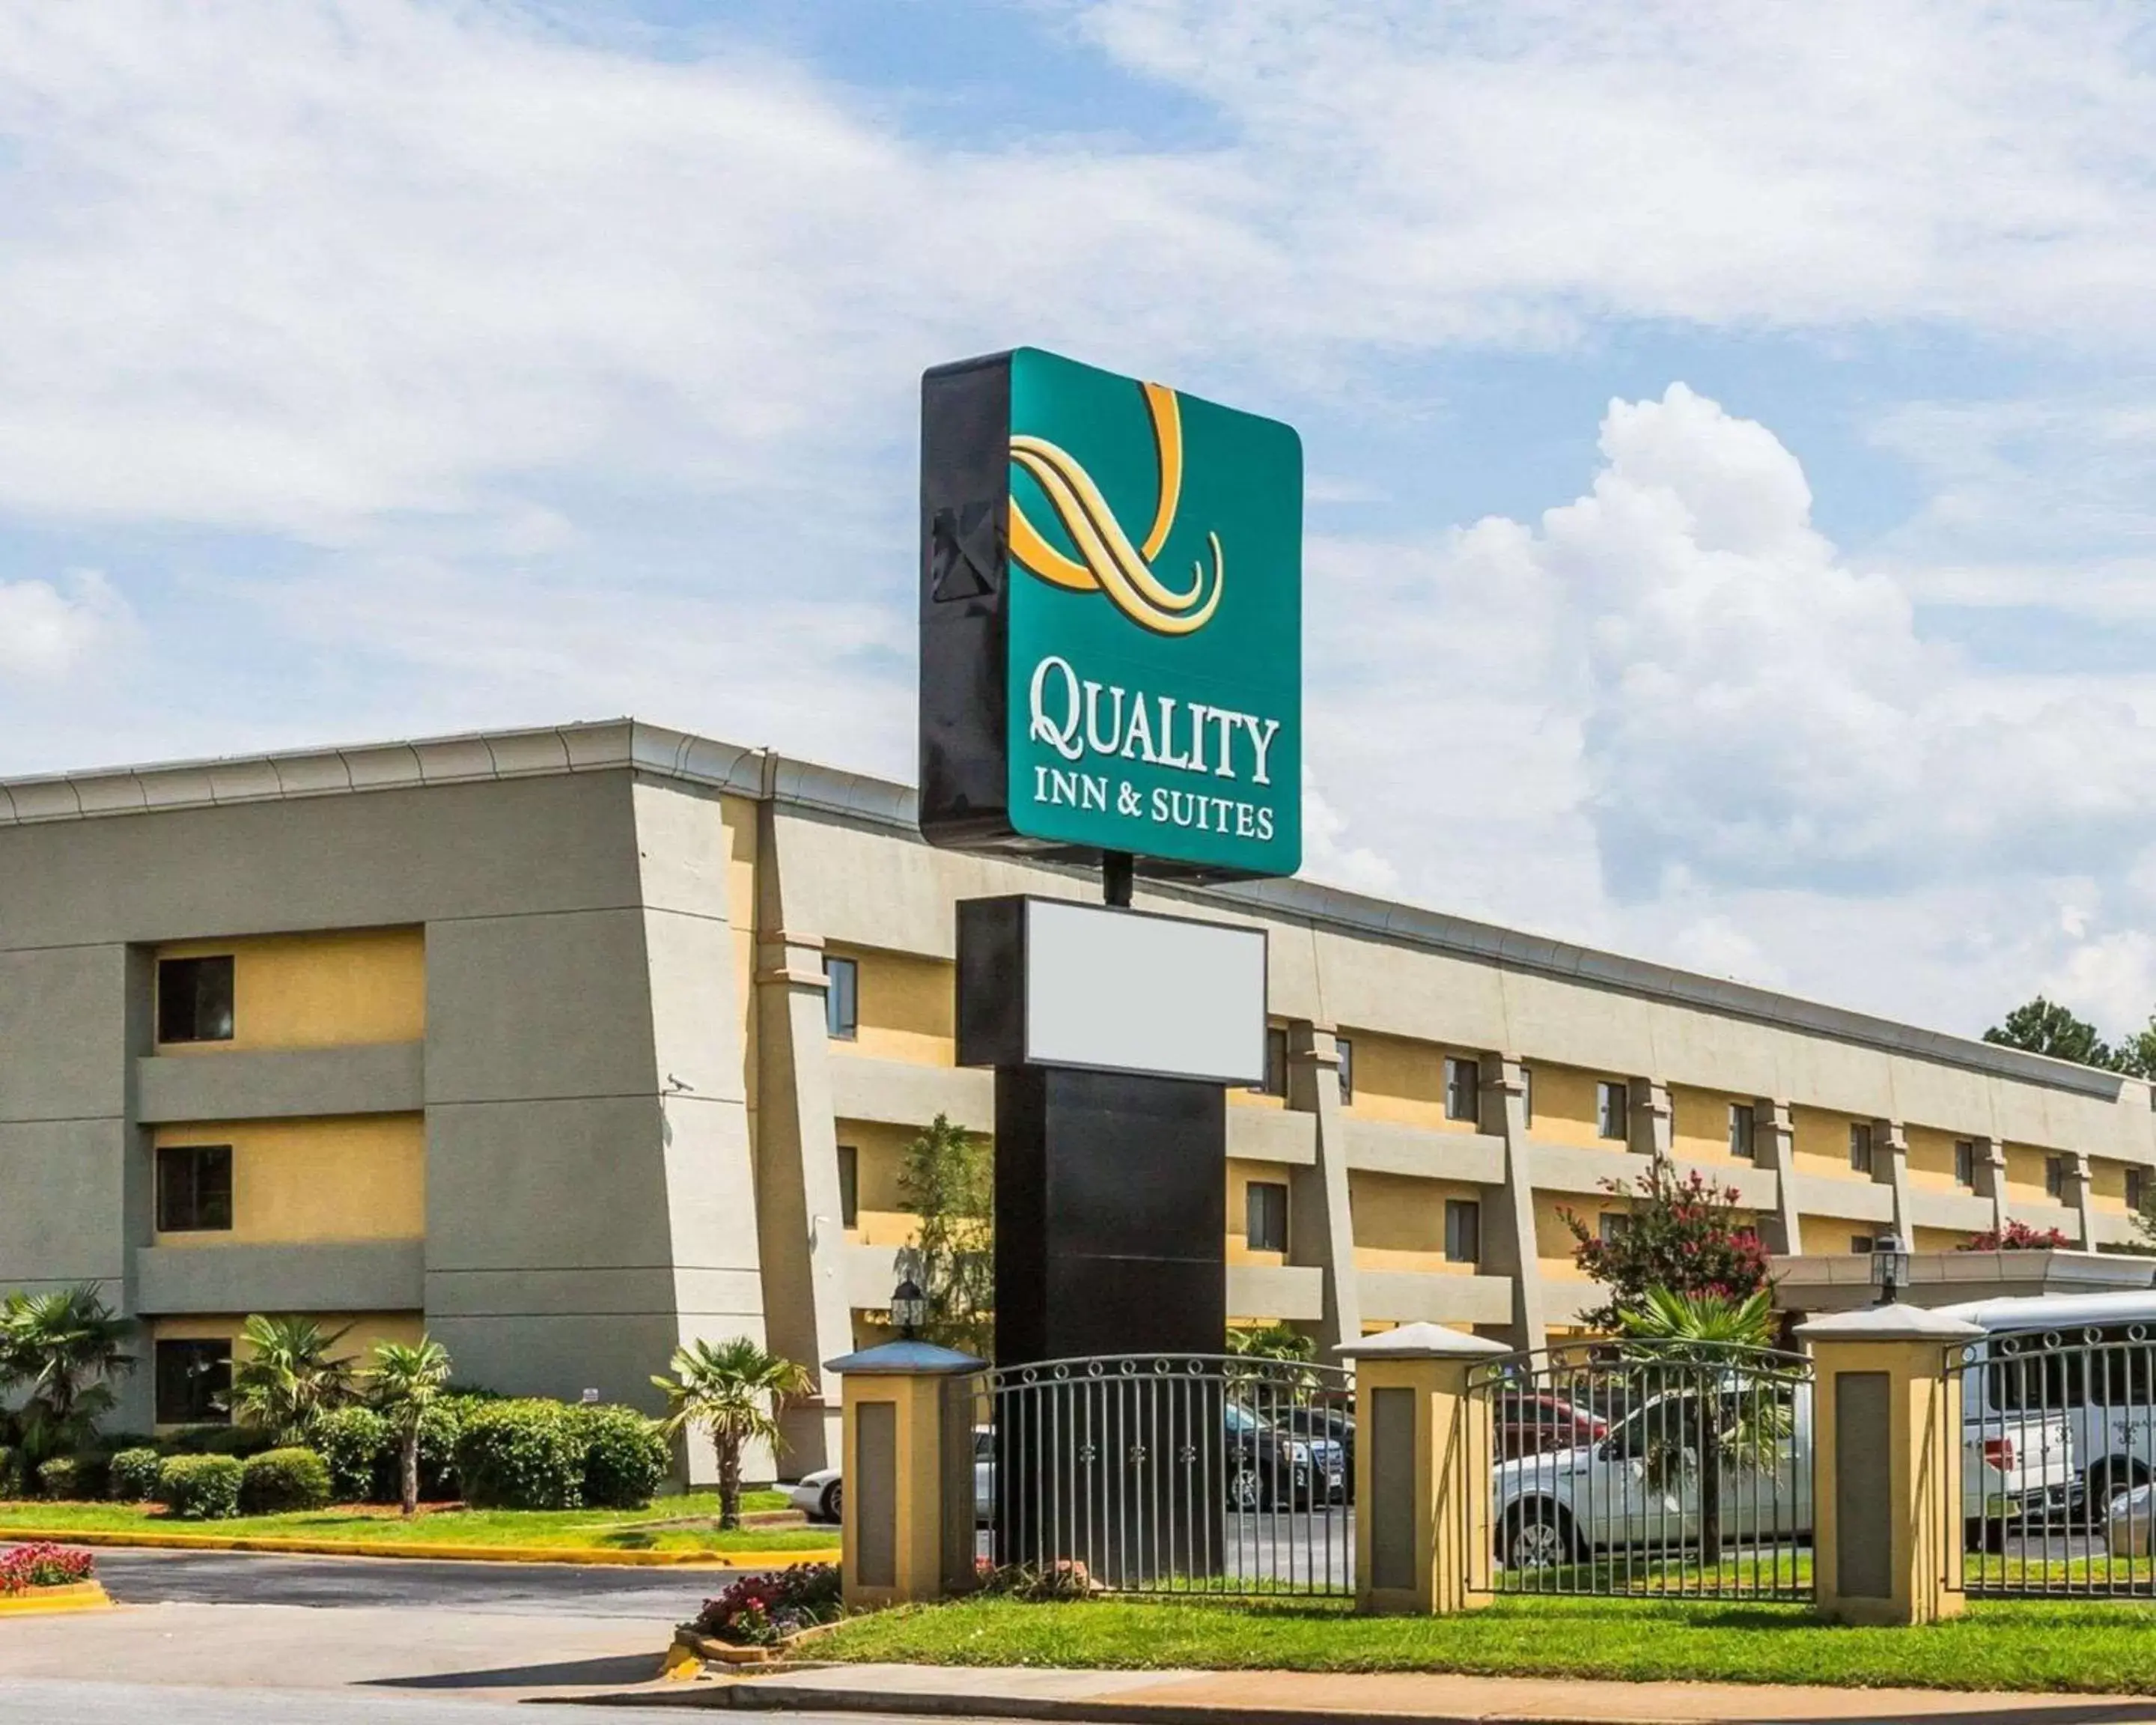 Property building in Quality Inn & Suites Atlanta Airport South